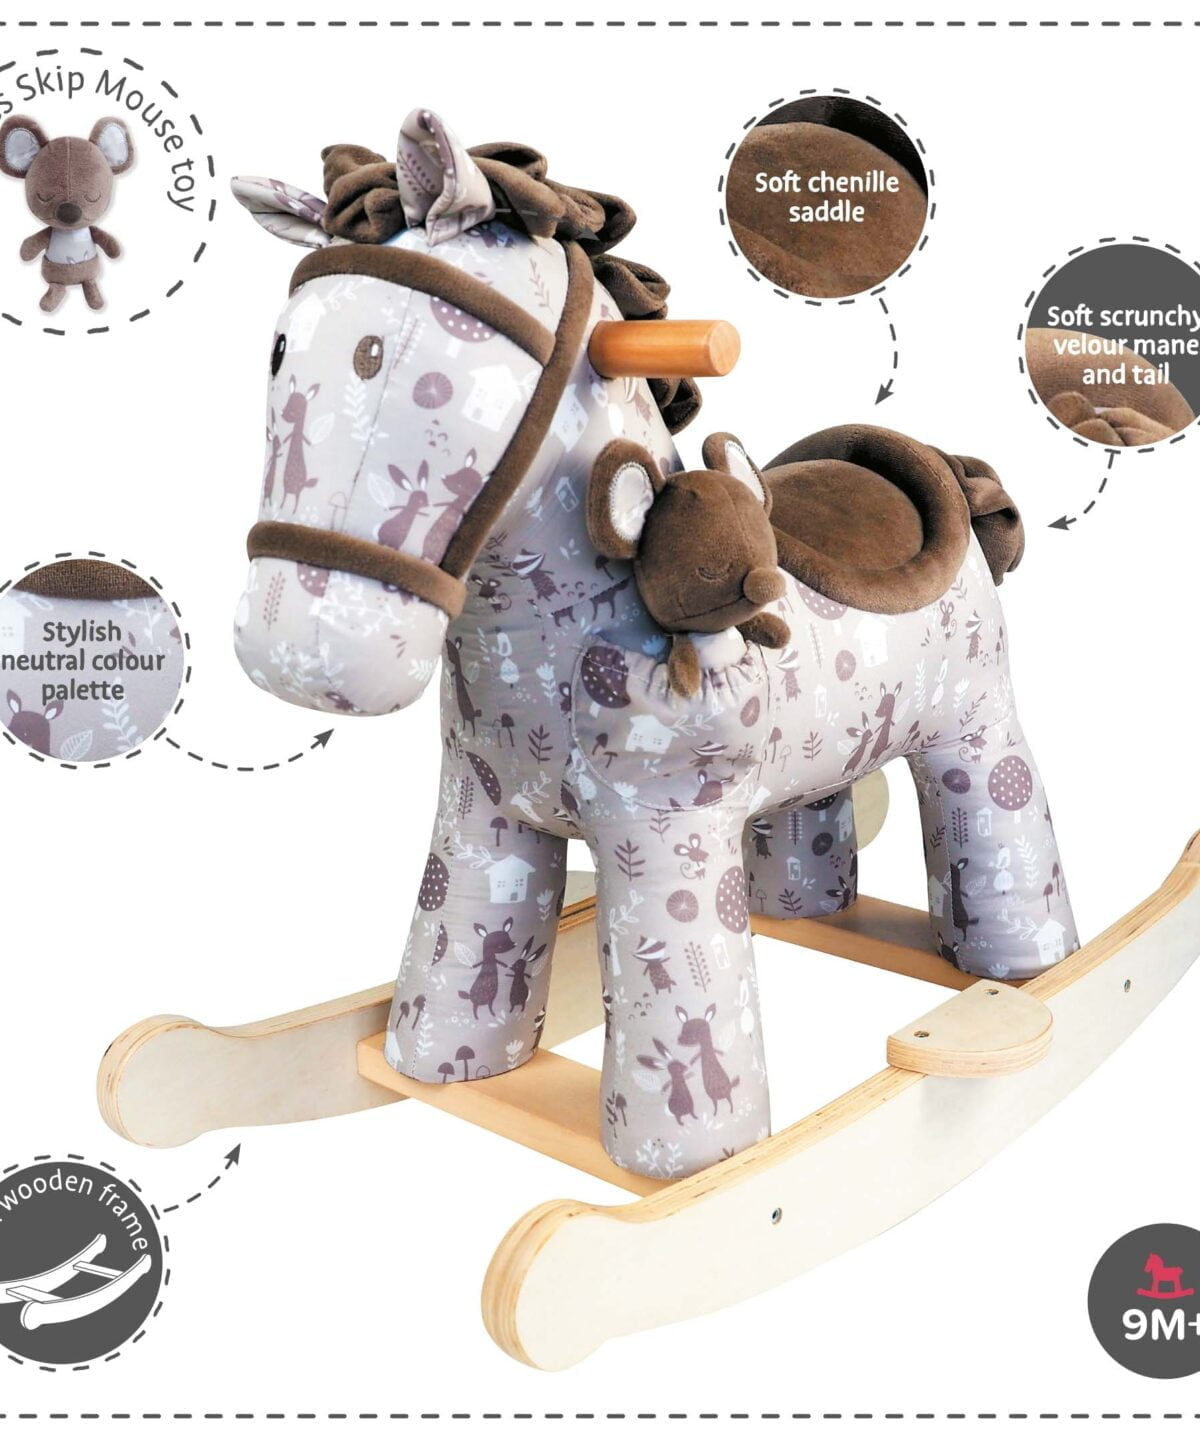 Features and benefits displayed for Biscuit & Skip Rocking Horse